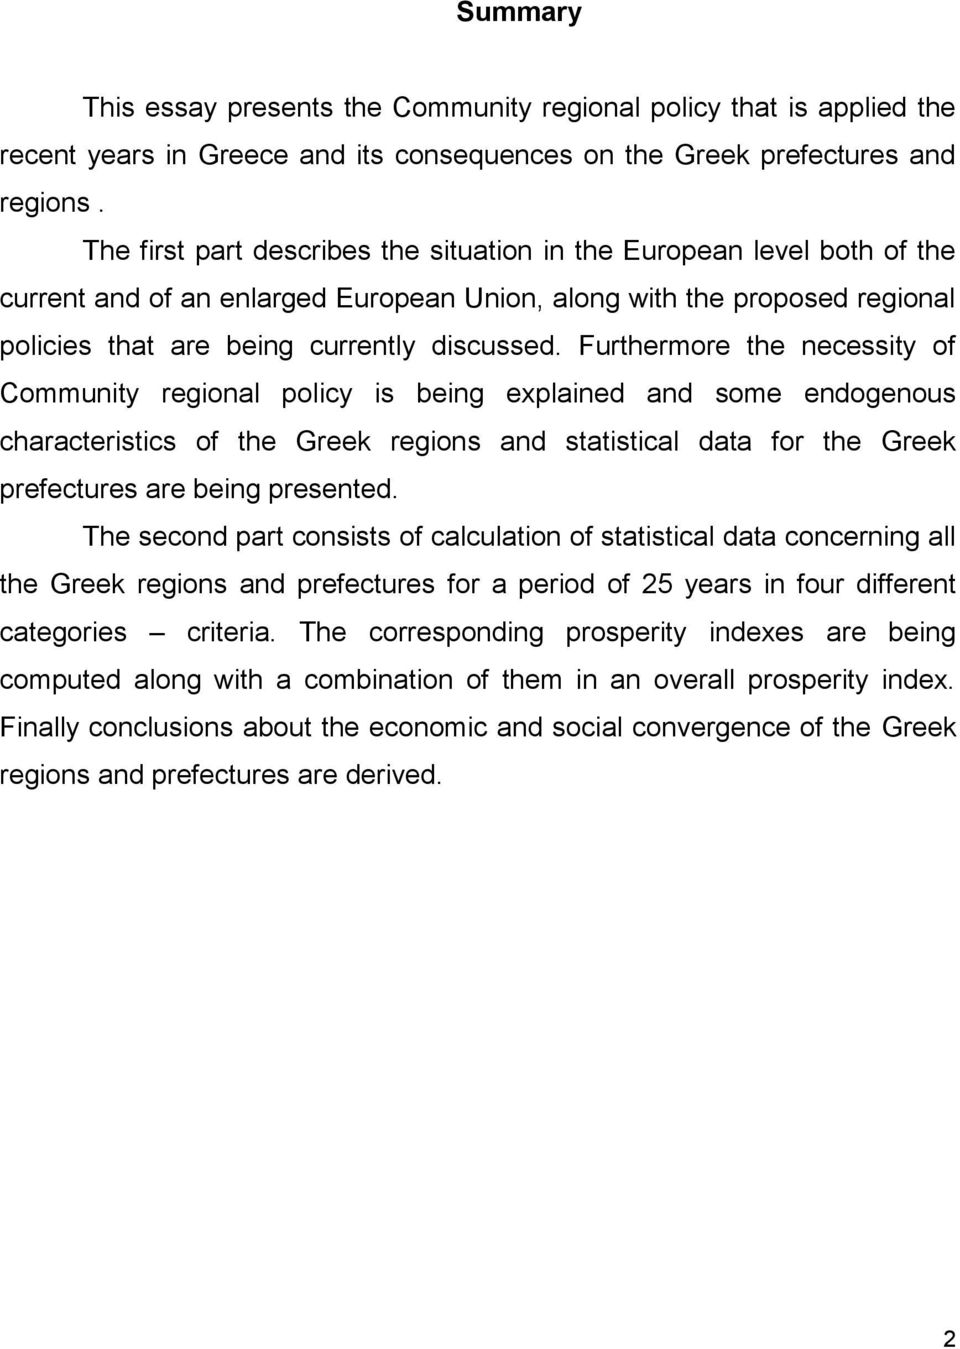 Furthermore the necessity of Community regional policy is being explained and some endogenous characteristics of the Greek regions and statistical data for the Greek prefectures are being presented.